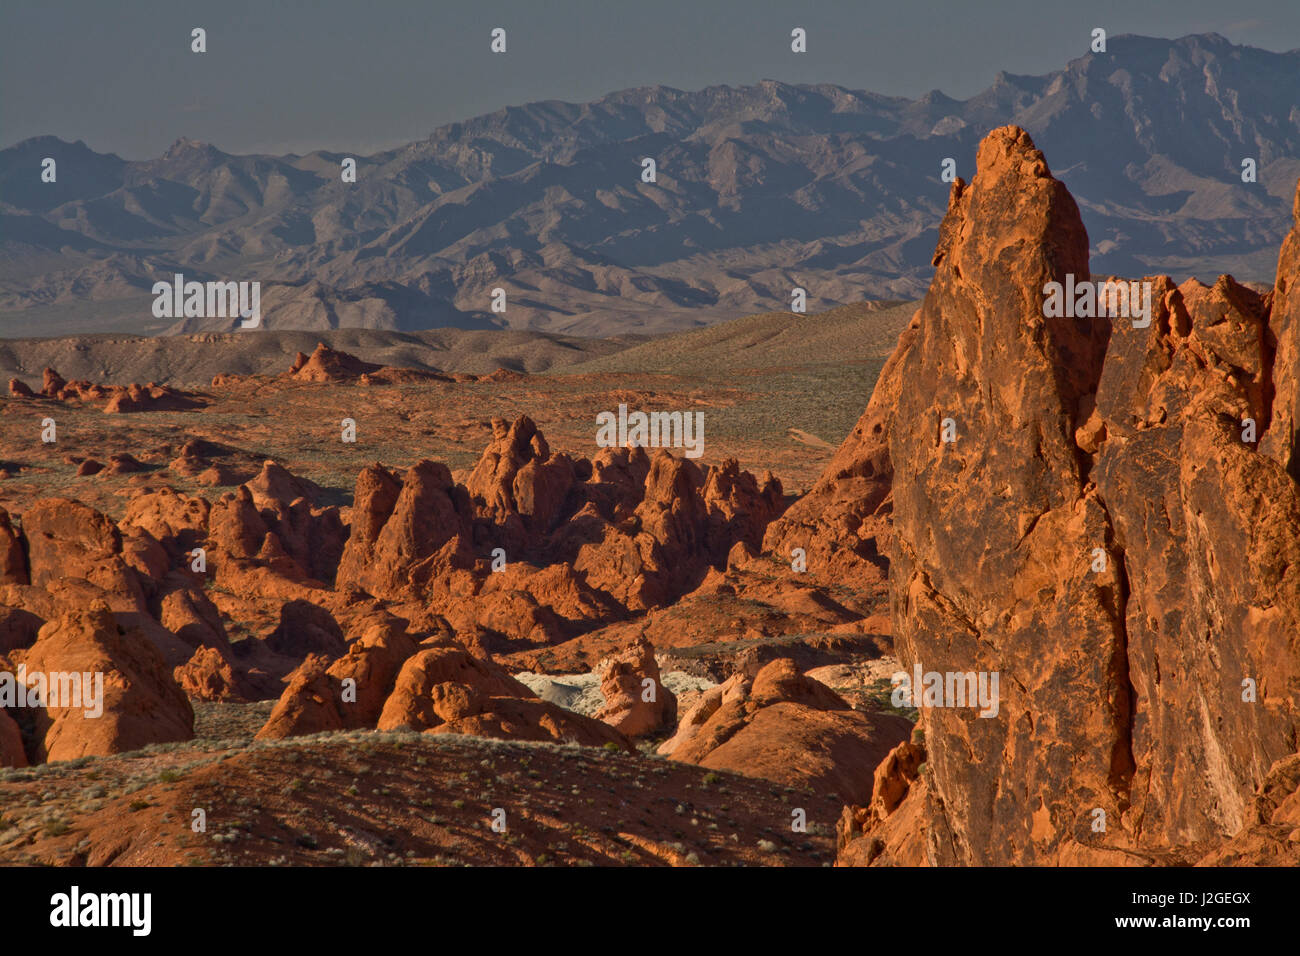 Rock Formations, mountains, Scenic Route, Valley of Fire State Park, Overton, Nevada, USA Stock Photo